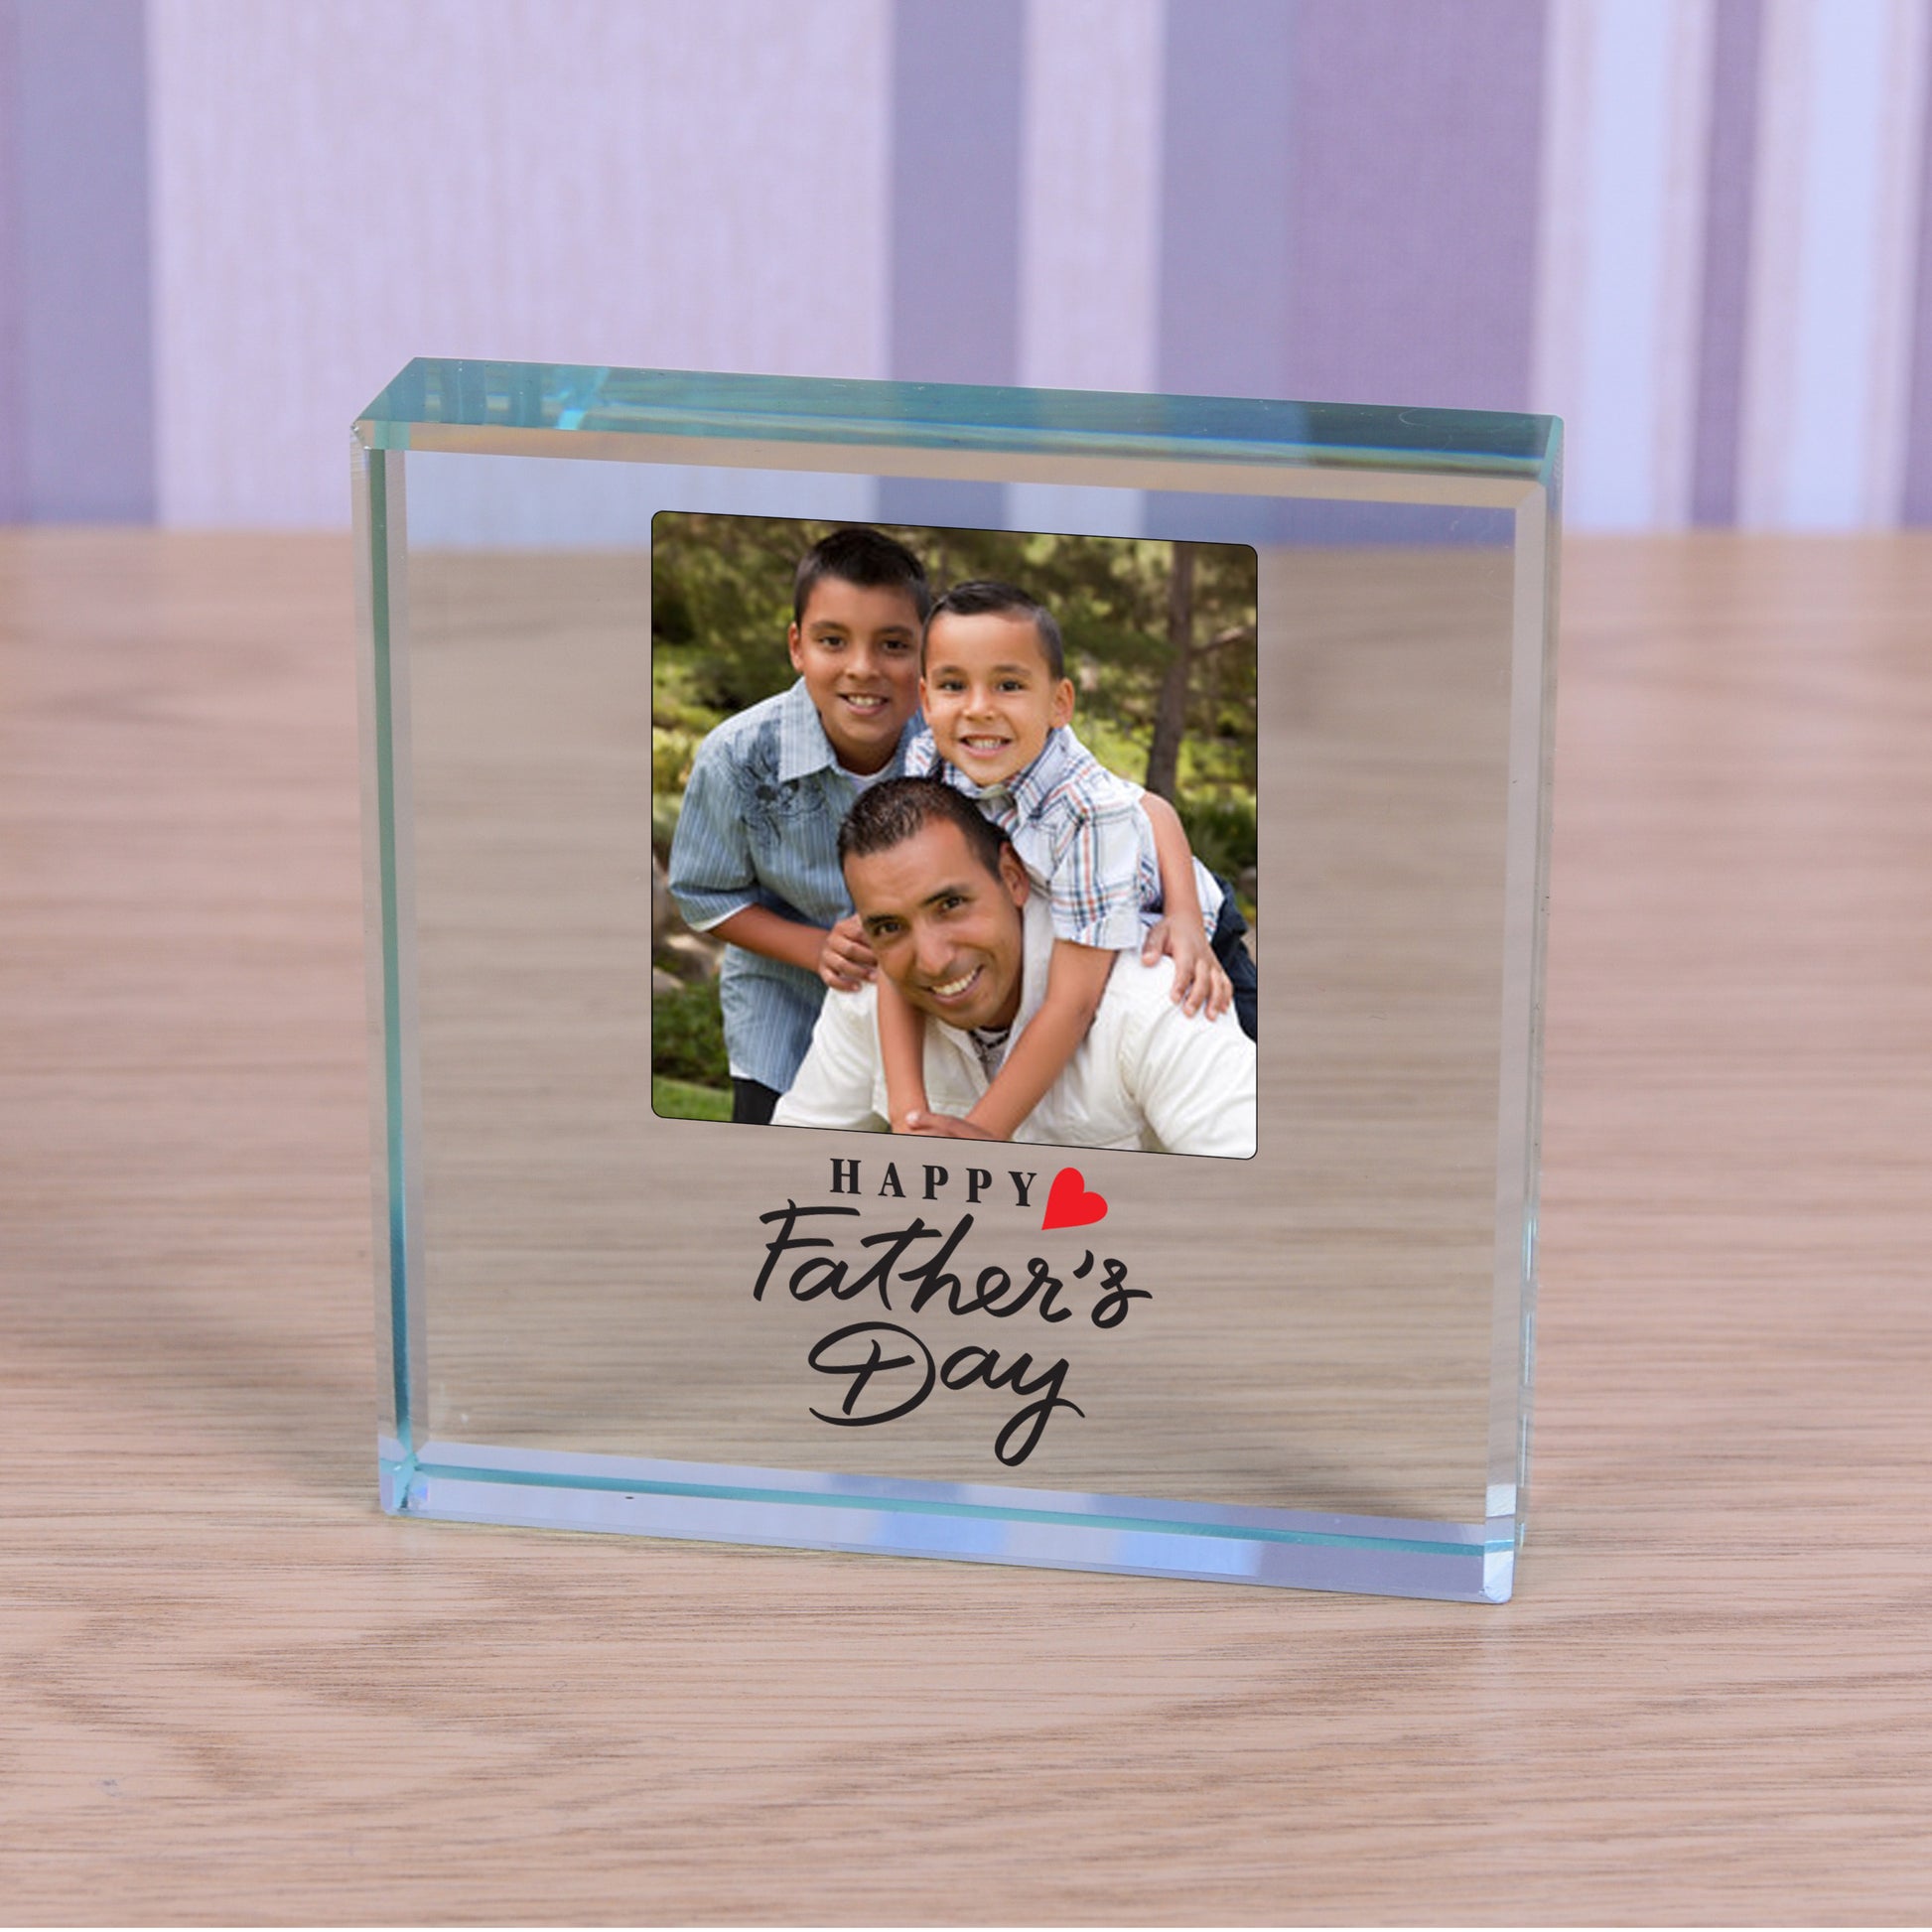 Photo Glass Token - Happy Fathers Day